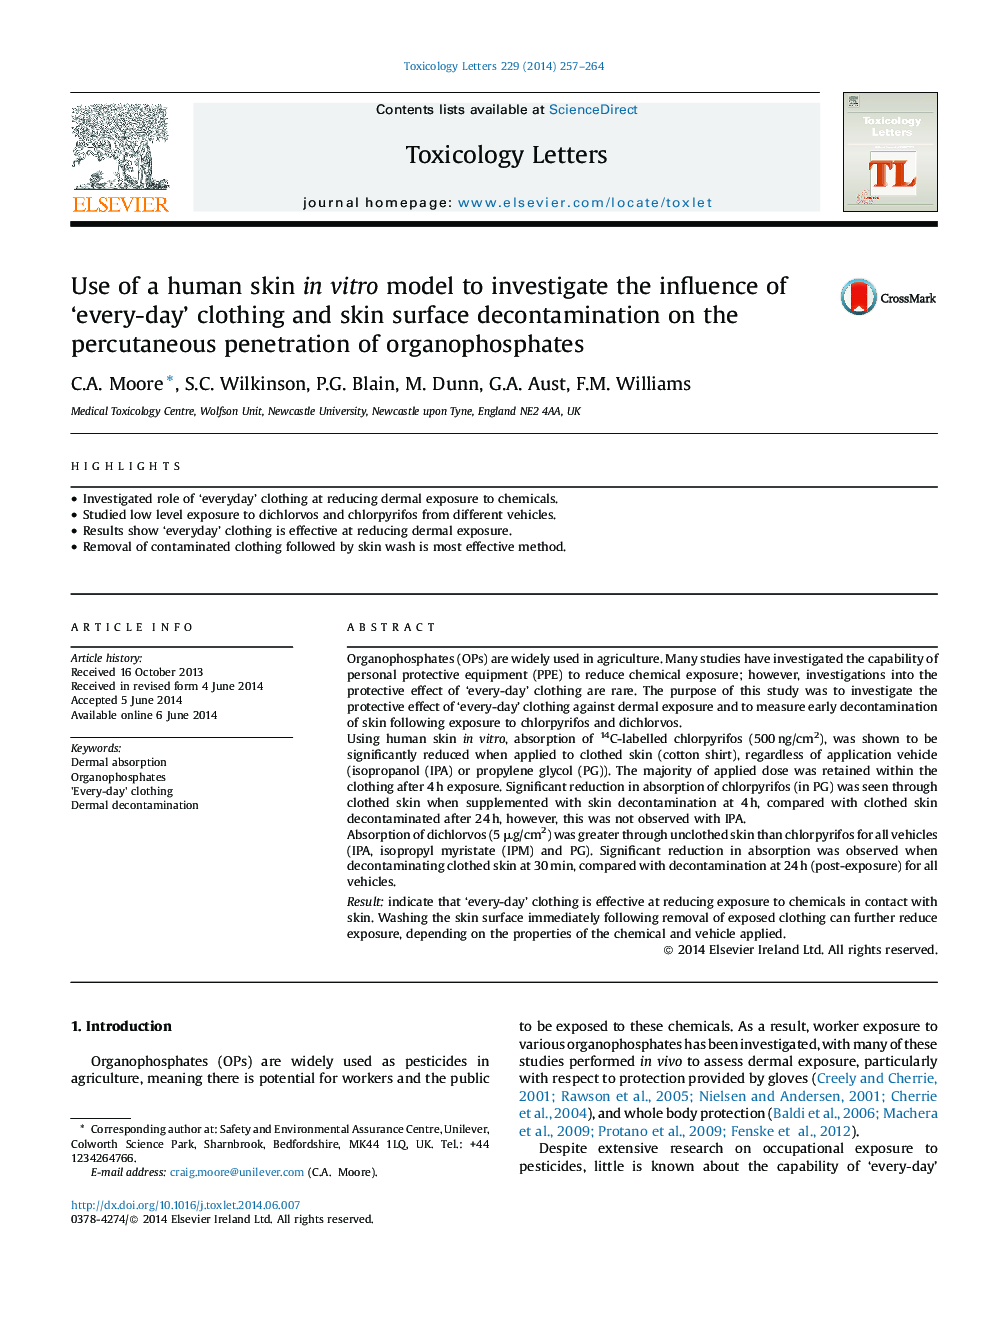 Use of a human skin in vitro model to investigate the influence of 'every-day' clothing and skin surface decontamination on the percutaneous penetration of organophosphates